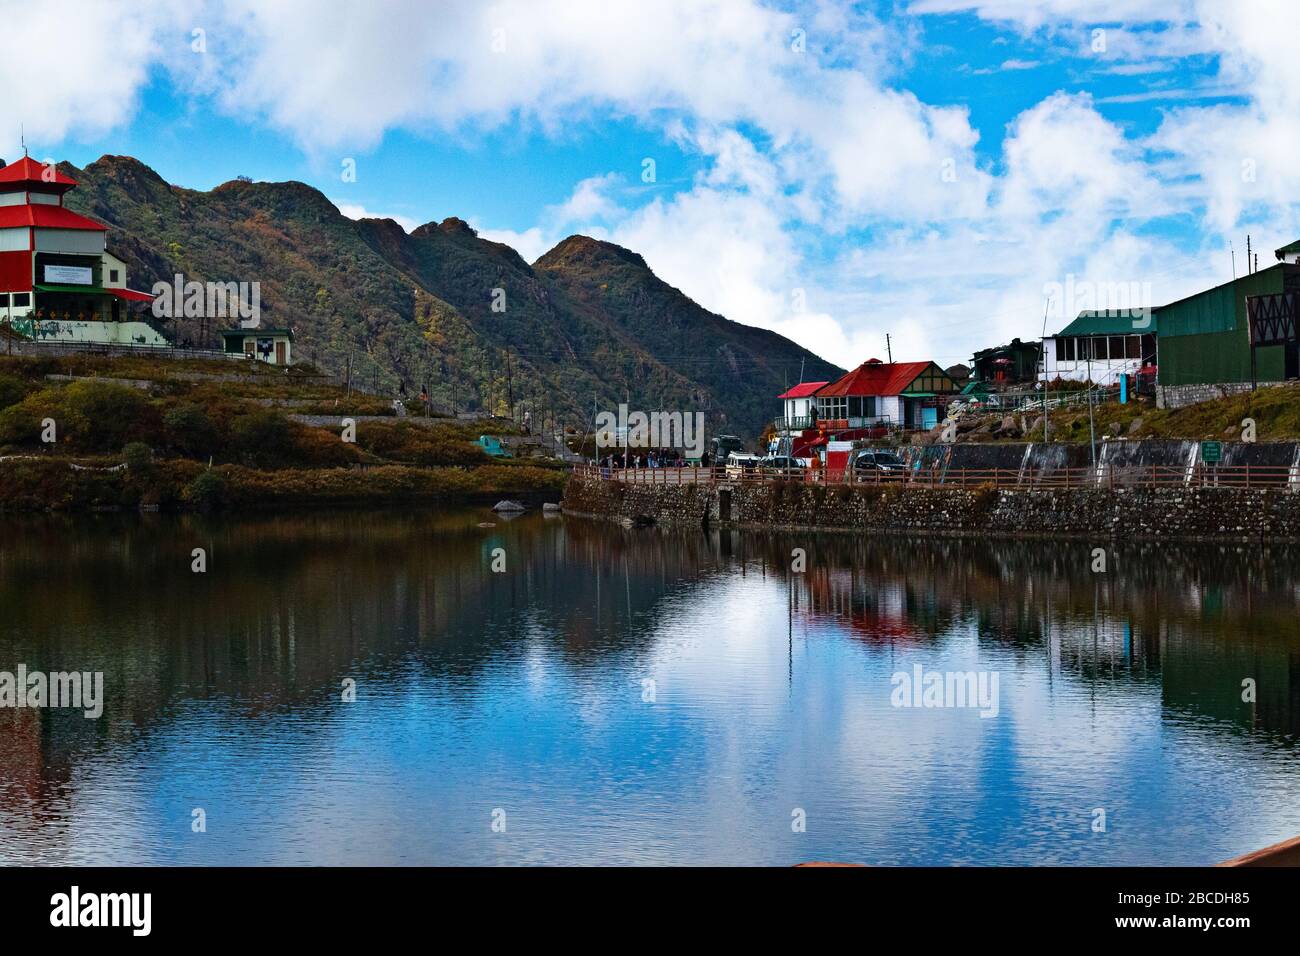 A landscape view of Tsomgo Lake, also called Changu Lake surrounded by stony hills and roads in Autumn season under blue sky. A sacred location for lo Stock Photo